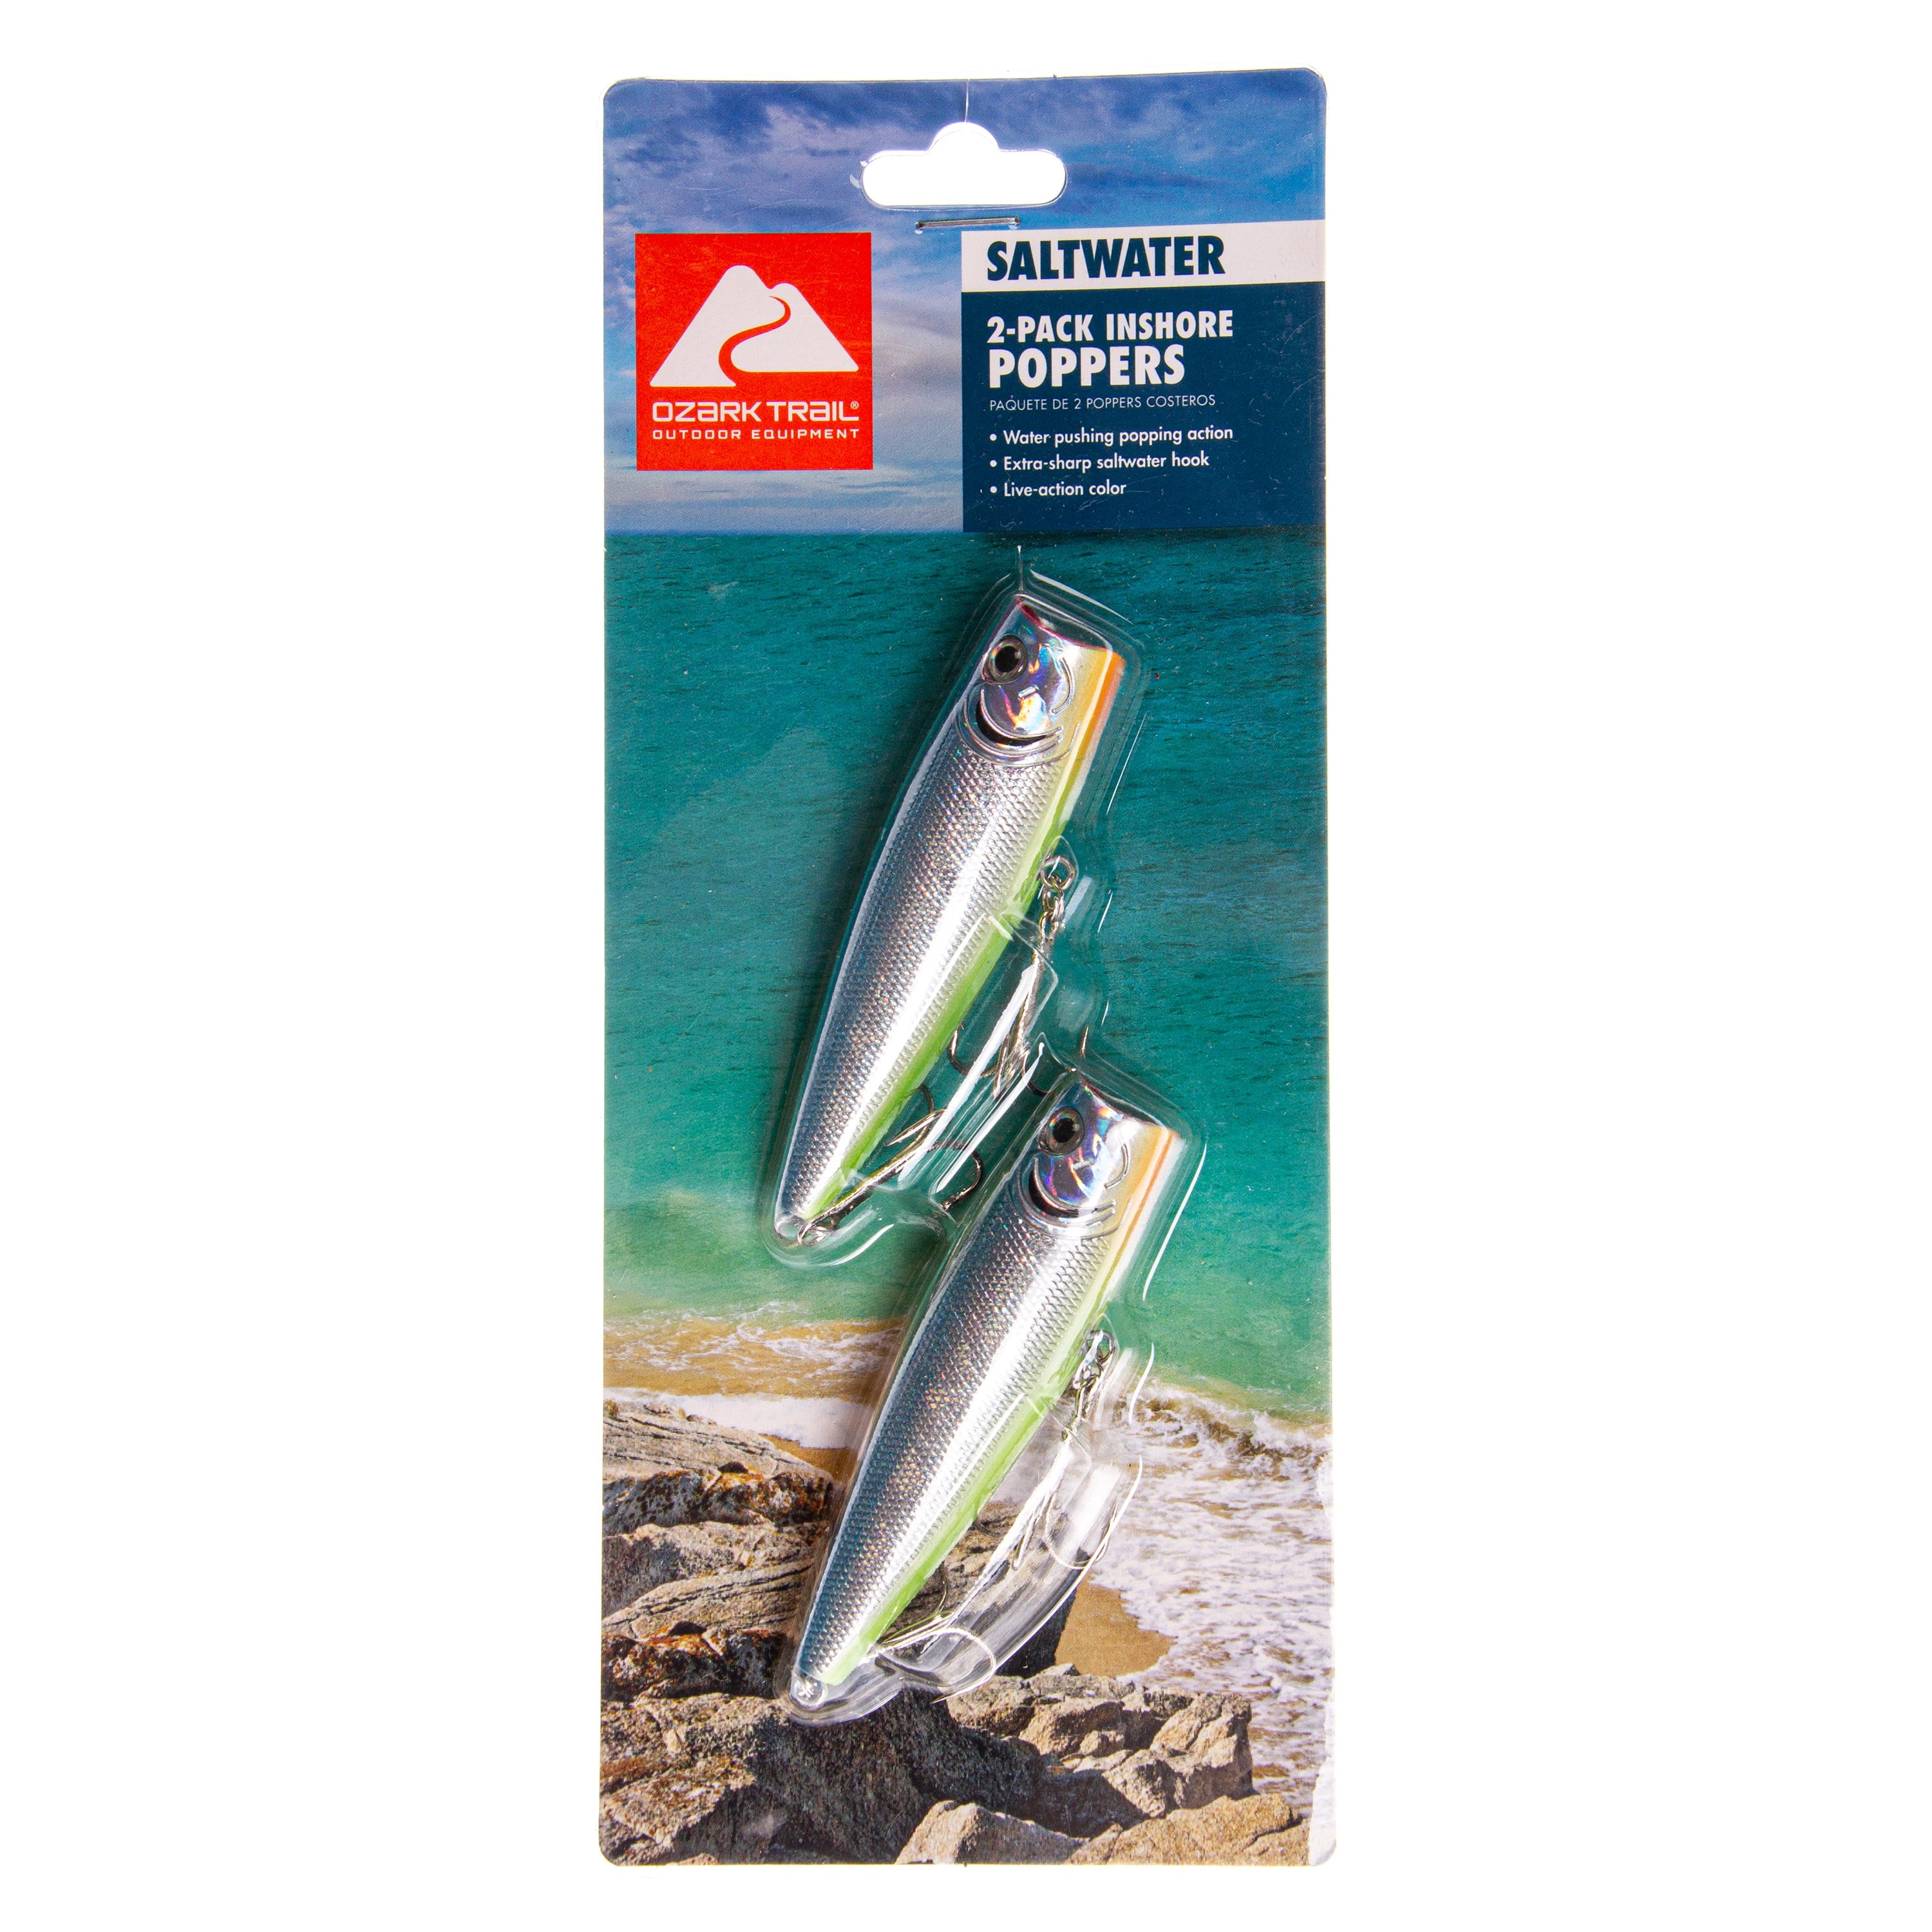 Ozark Trails Hard Plastic Saltwater Inshore Popper Fishing Lures, 2-pack.  Painted in fish attracting colors.